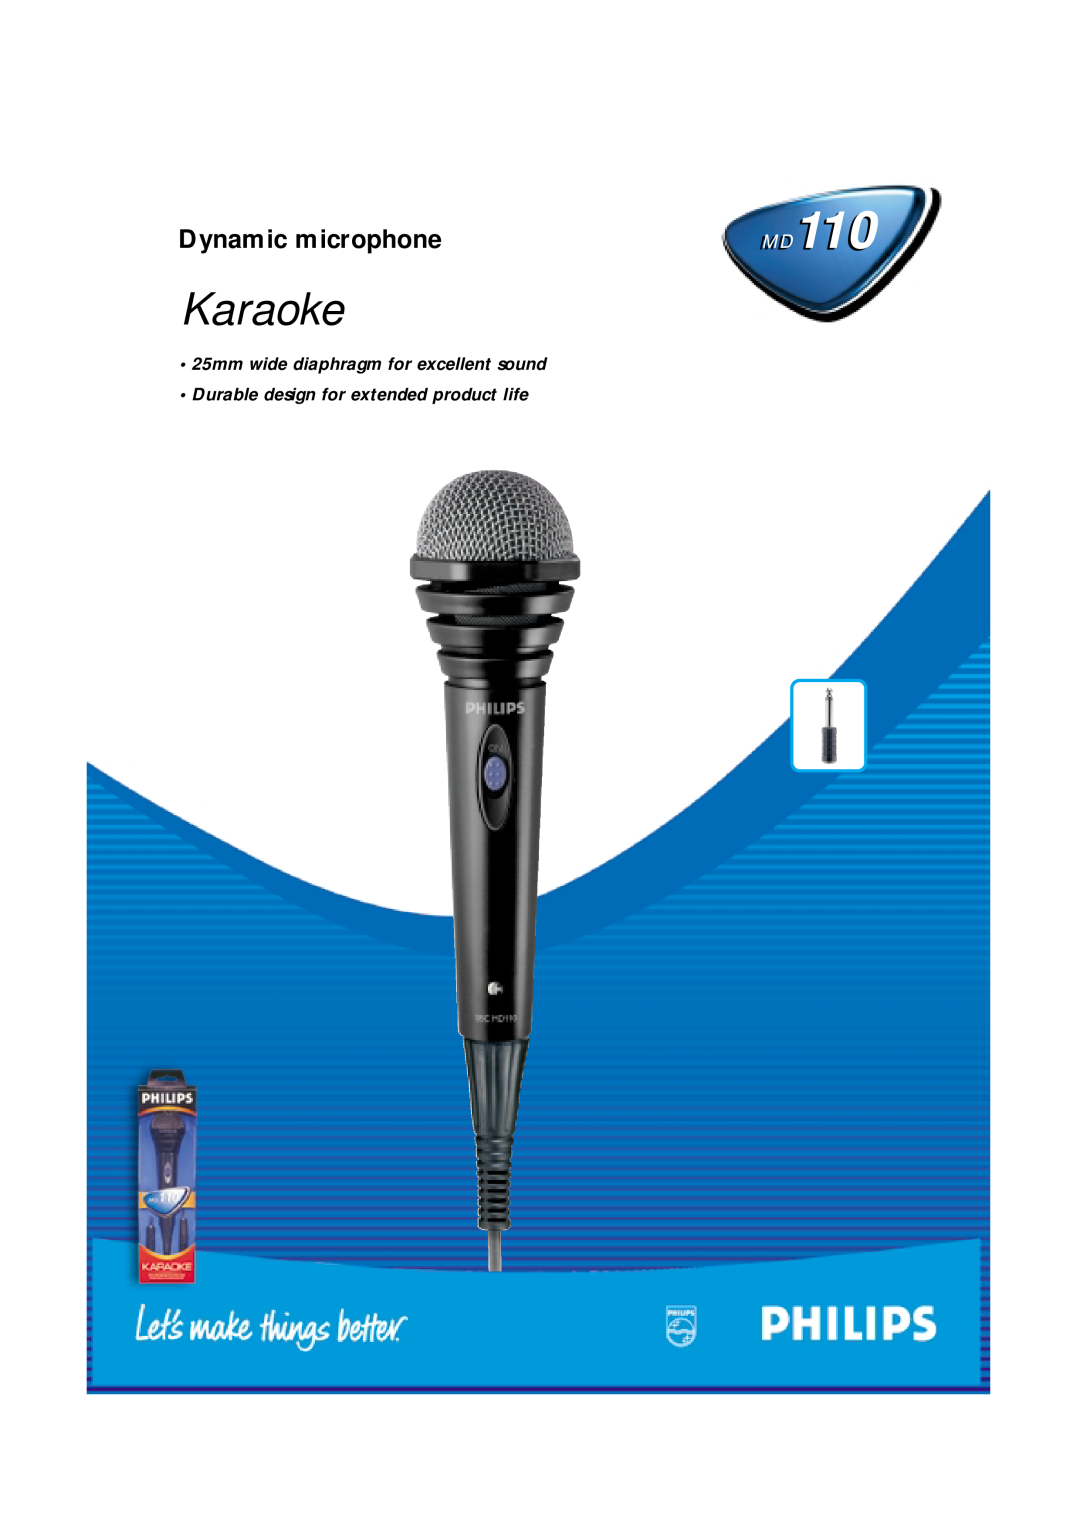 Philips MD110 manual Karaoke, Dynamic microphone, 25mm wide diaphragm for excellent sound 